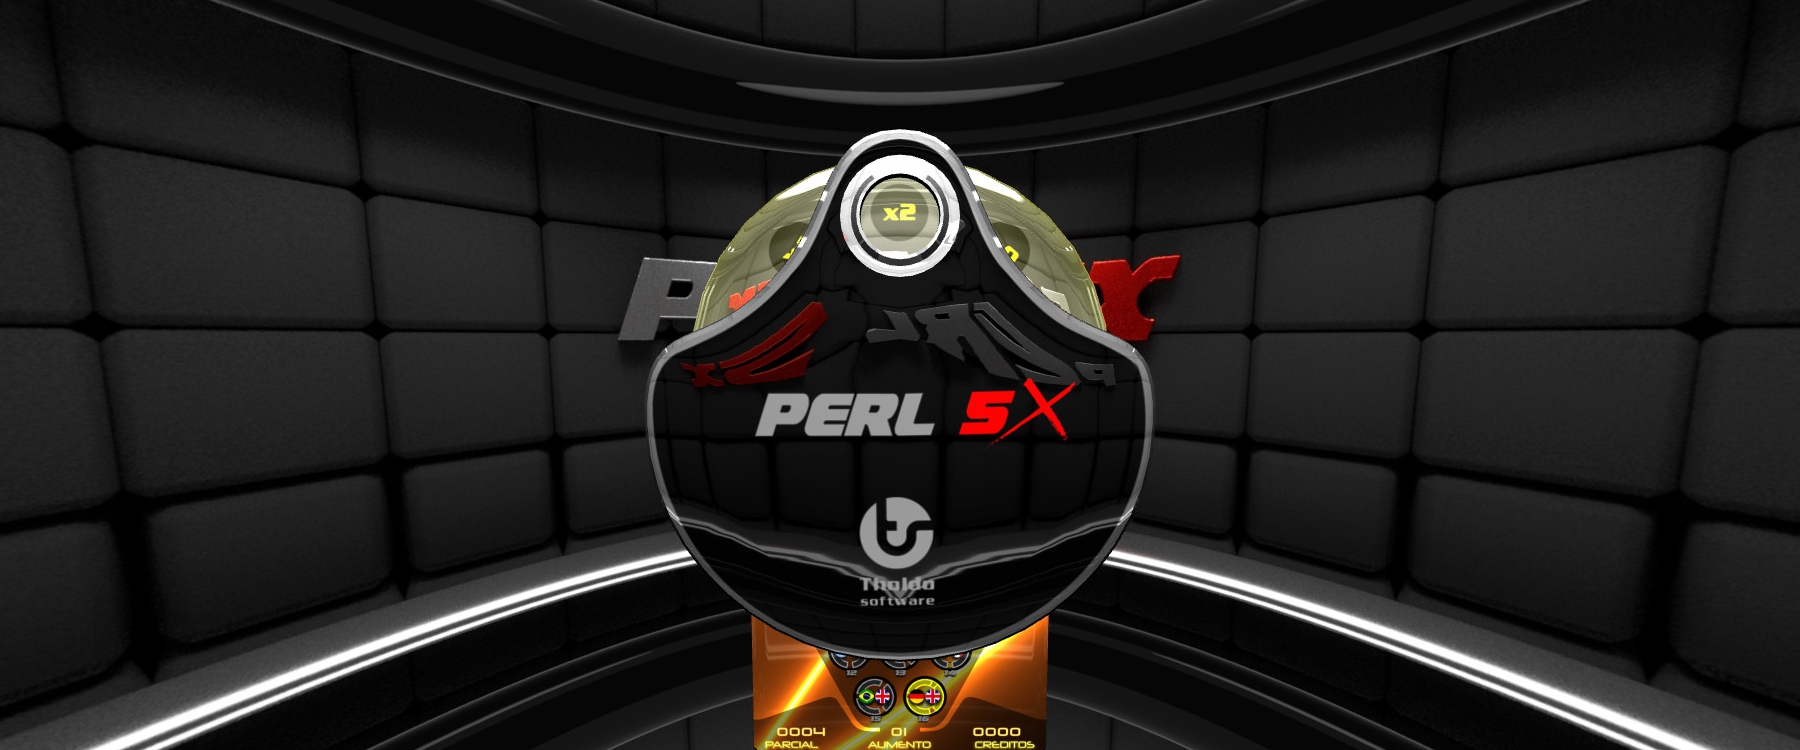 Perl5X Roulette Video Game